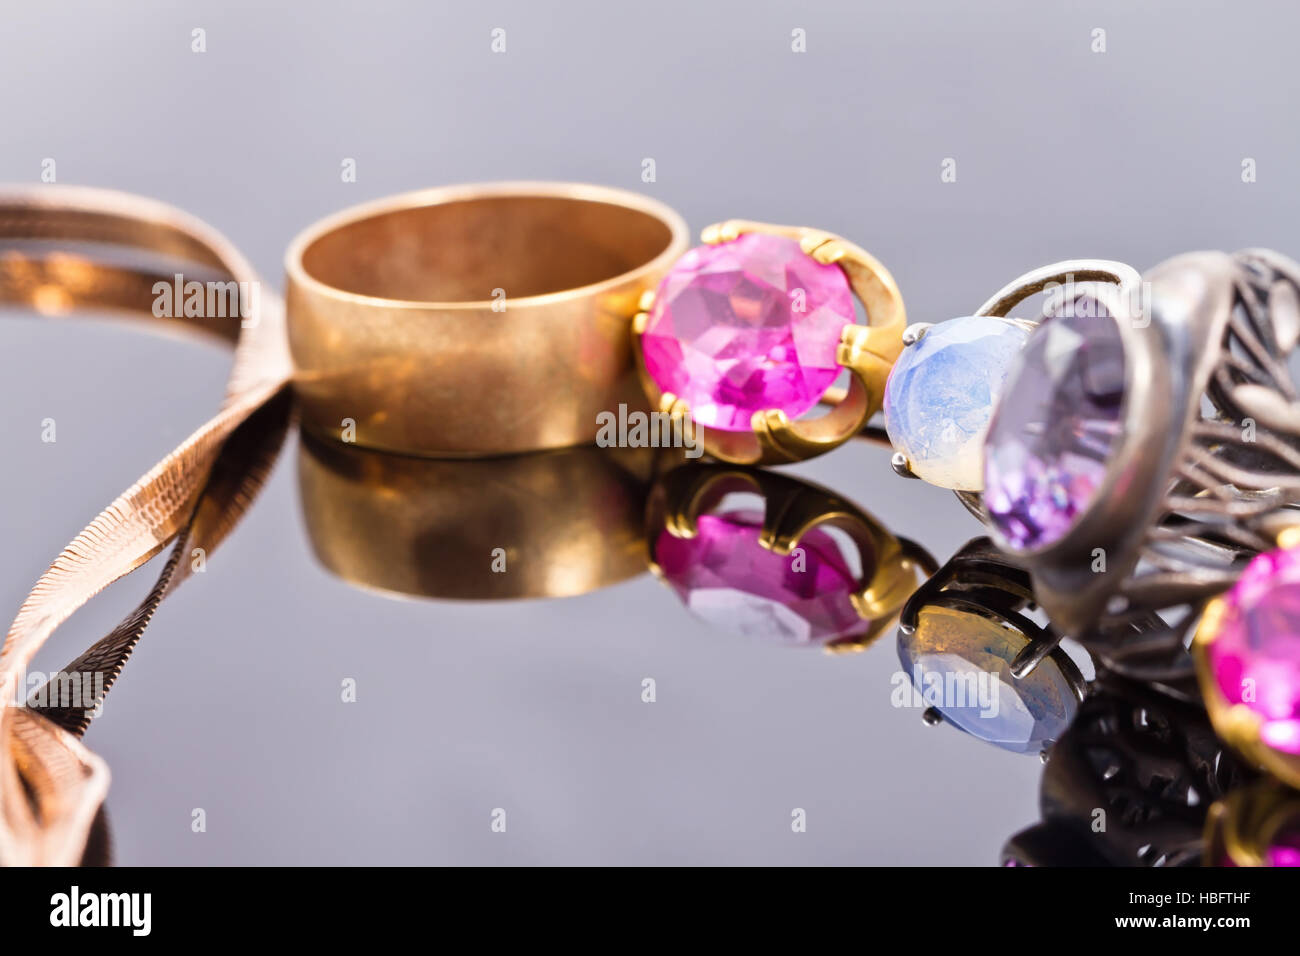 variety of jewelry made of precious metals Stock Photo